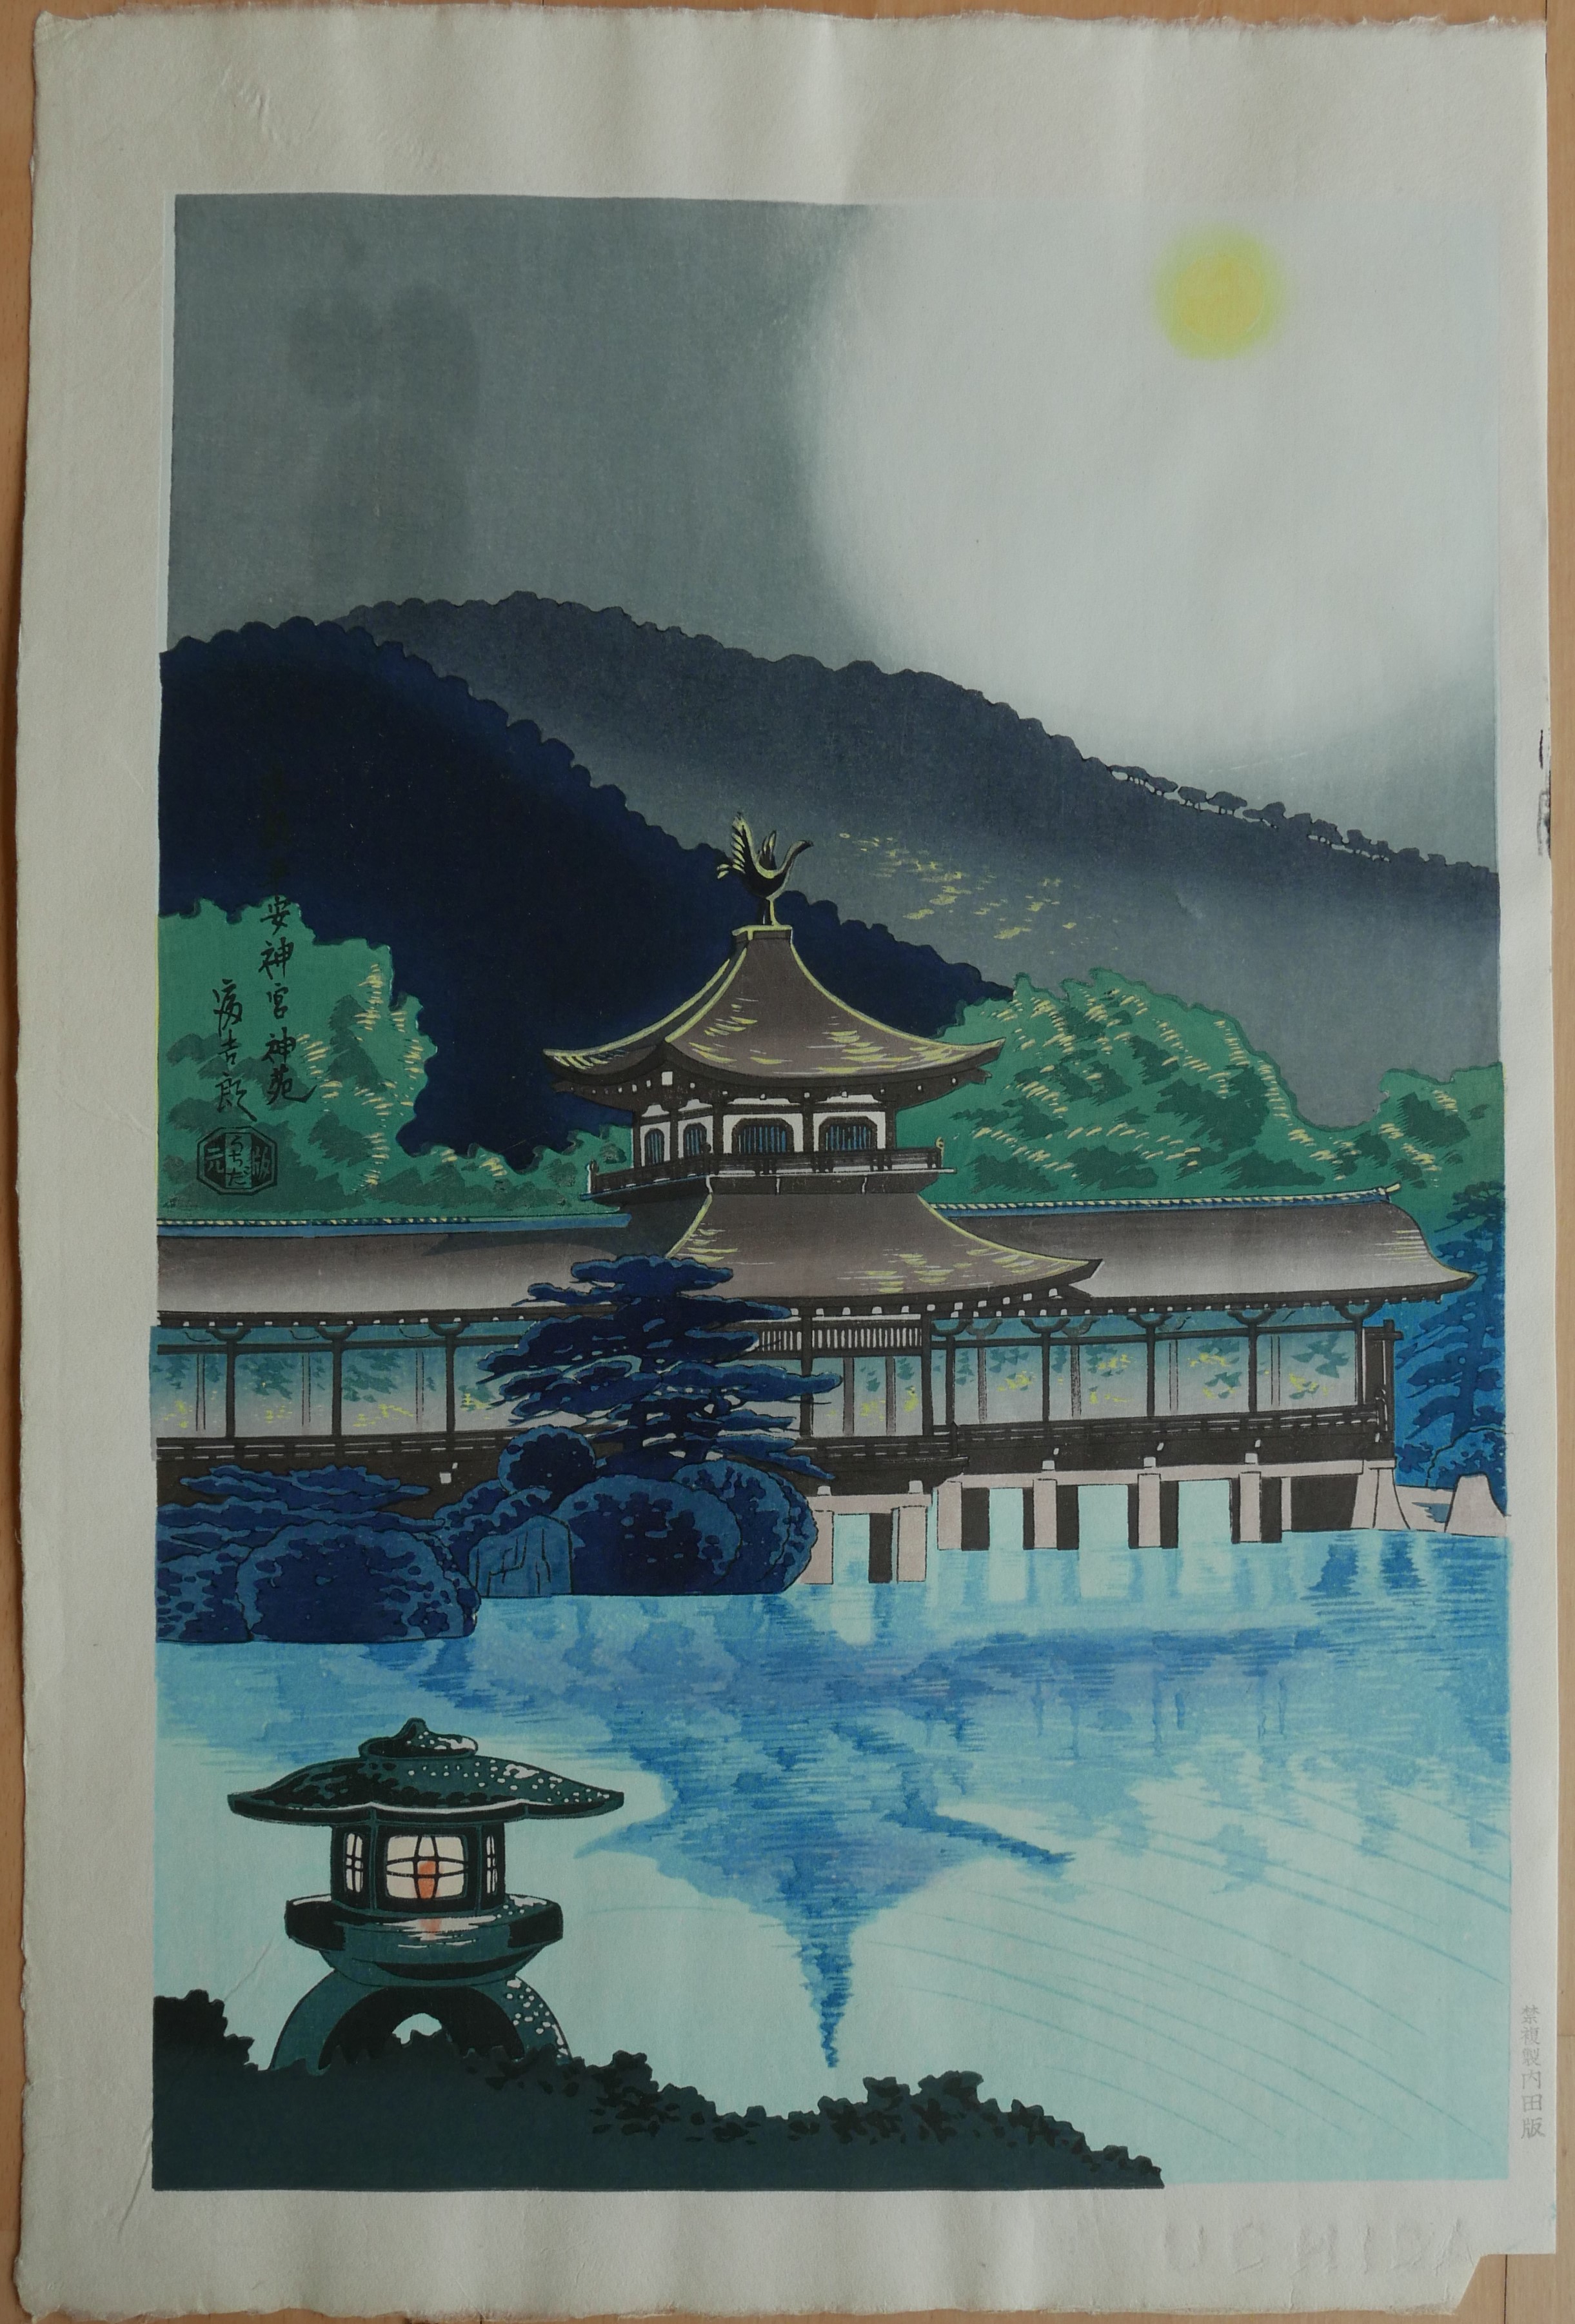 "The Court-Yard of the Heian Shrine in Kyoto" Mounted Woodblock Print (1-54) Originated by Tomikichi